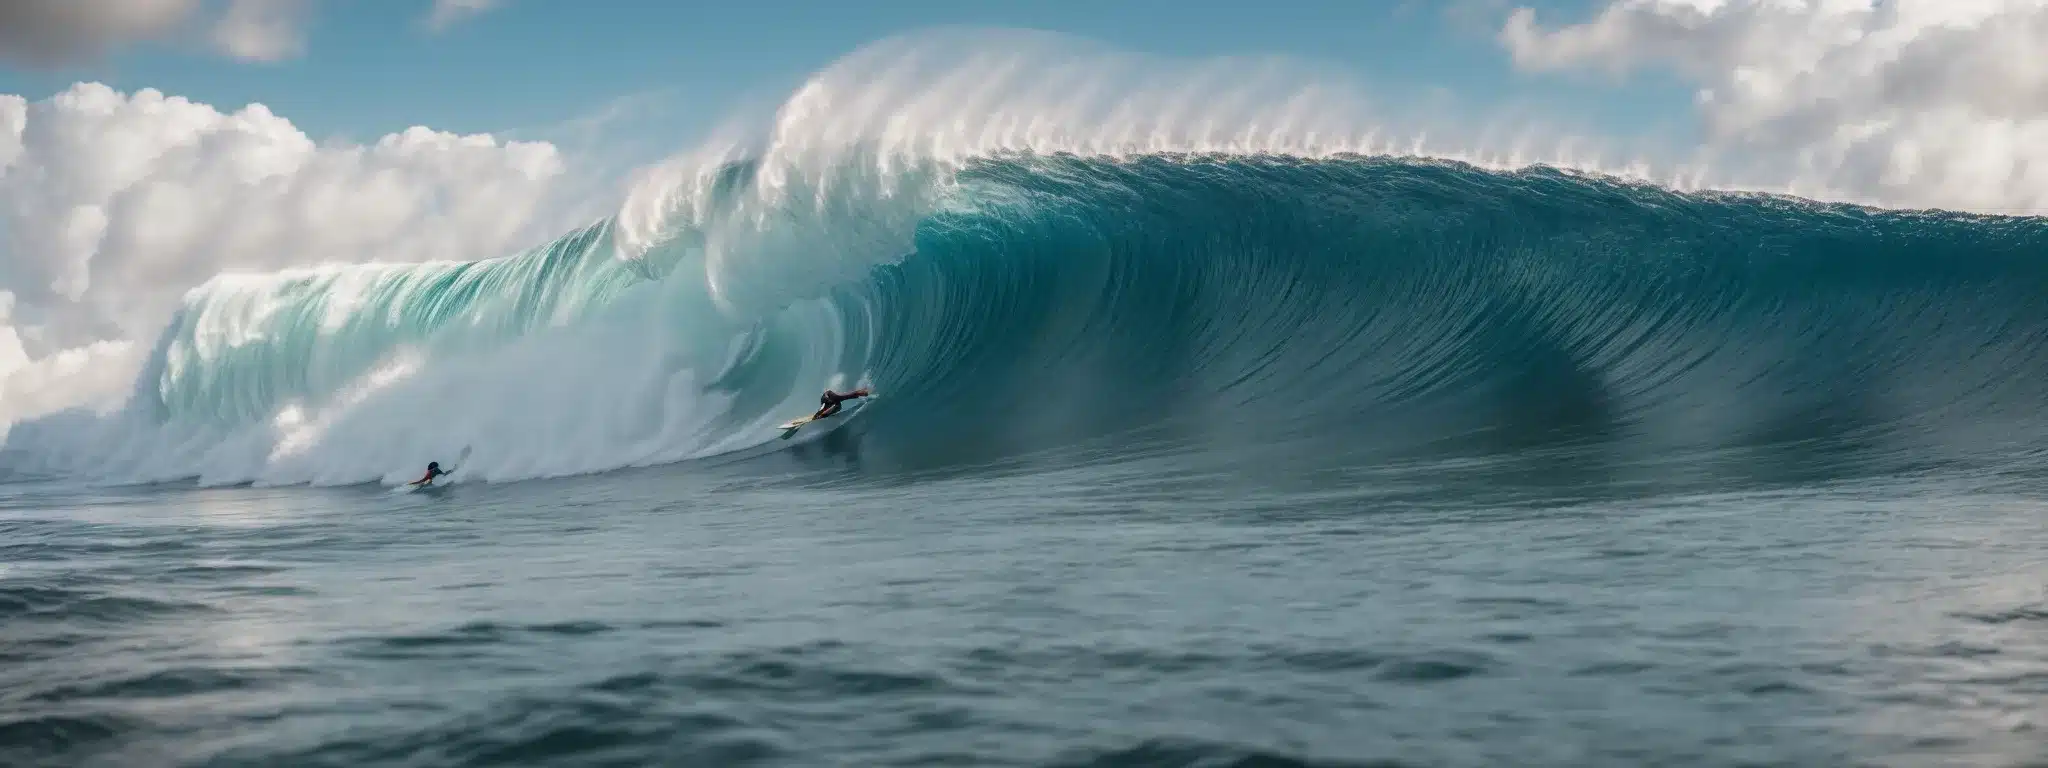 A Person Surfing A Giant Wave, Embodying Agility And Adaptation In A Dynamic Ocean Landscape.